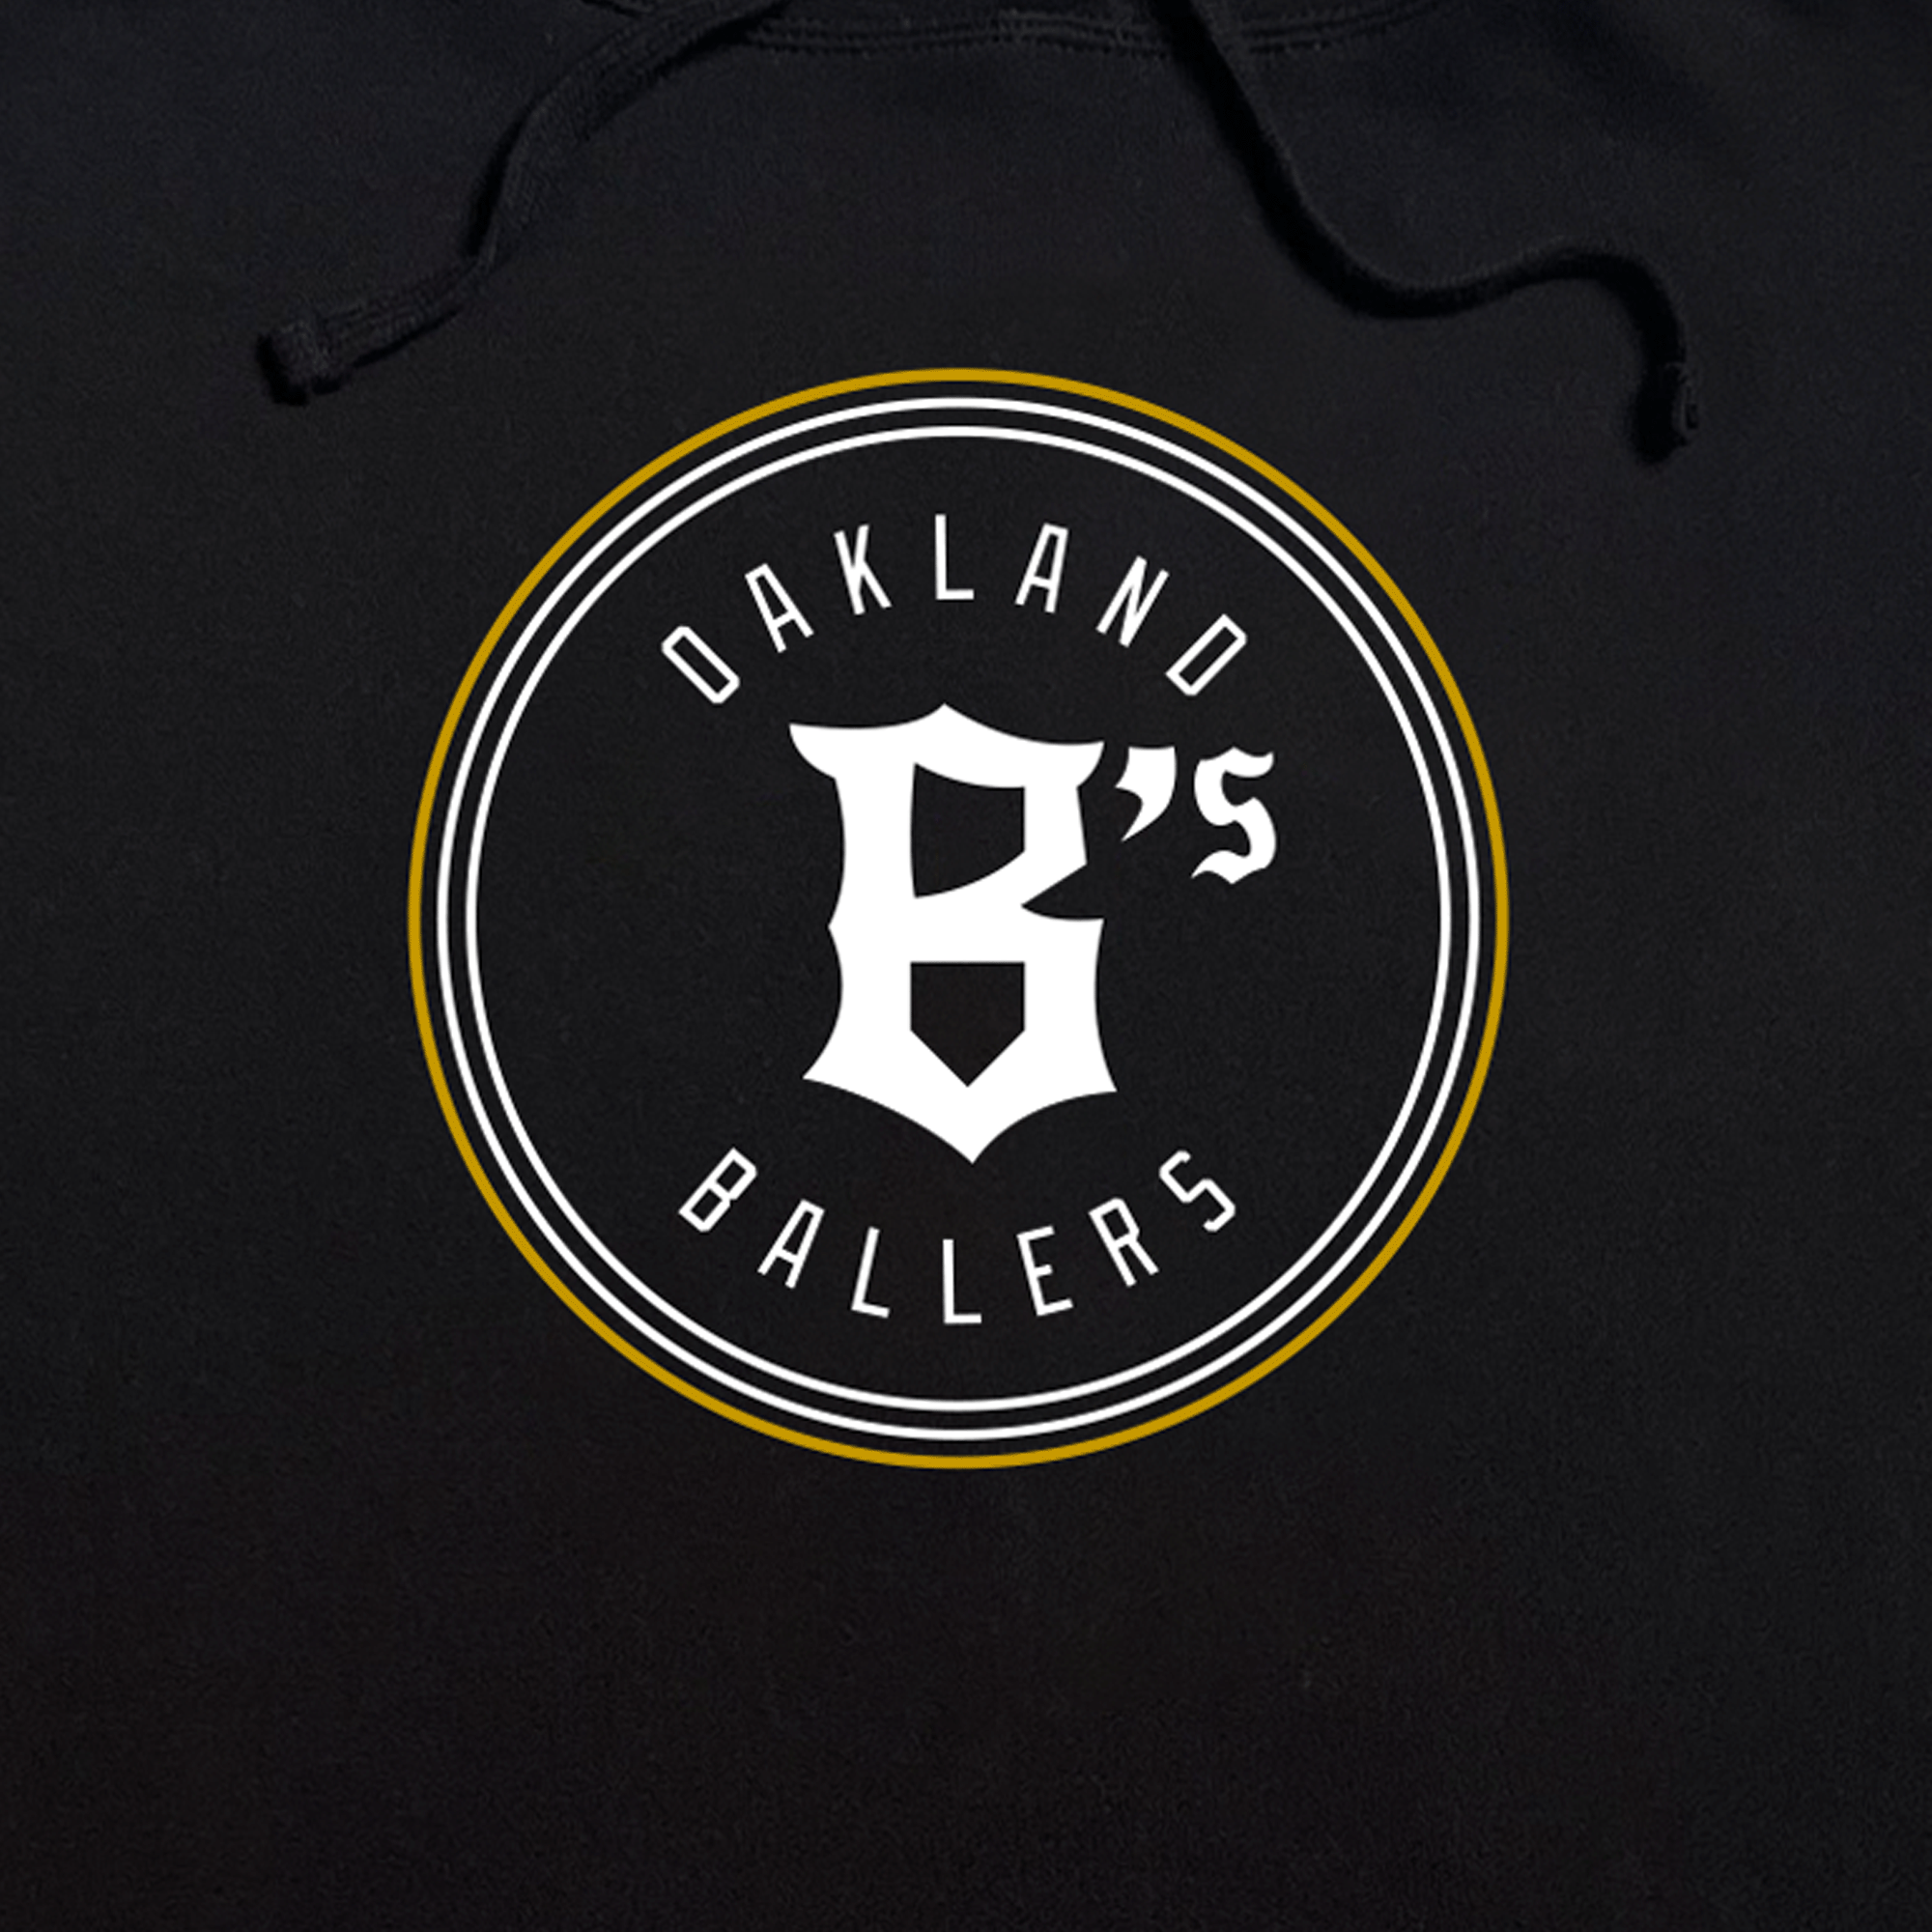 Close-up of round white and gold Oakland Ballers logo and wordmark on the front chest of a black pullover hoodie sweatshirt.